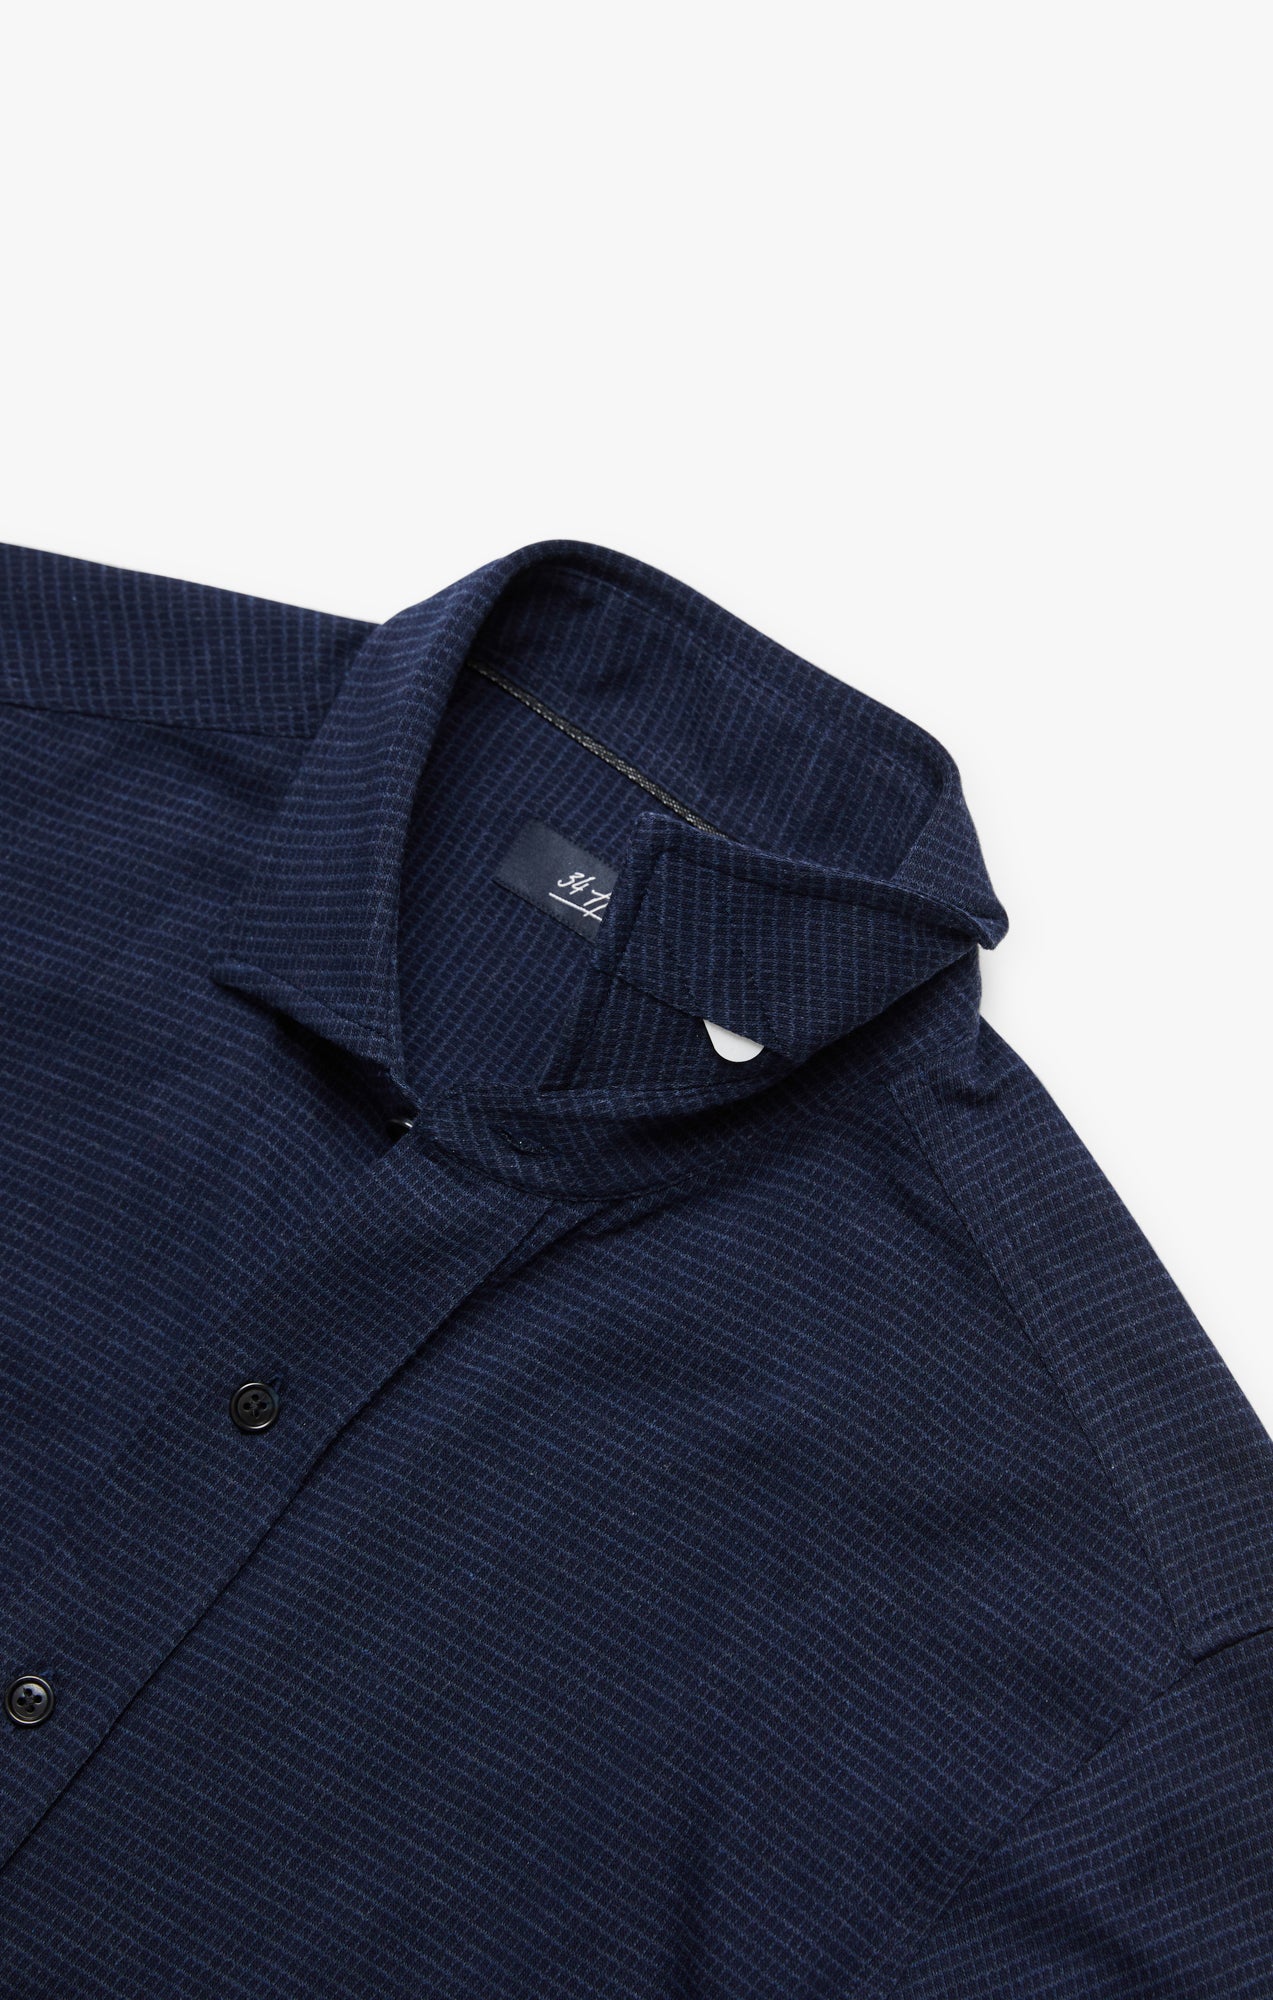 Structured Shirt In Navy Blue Image 11